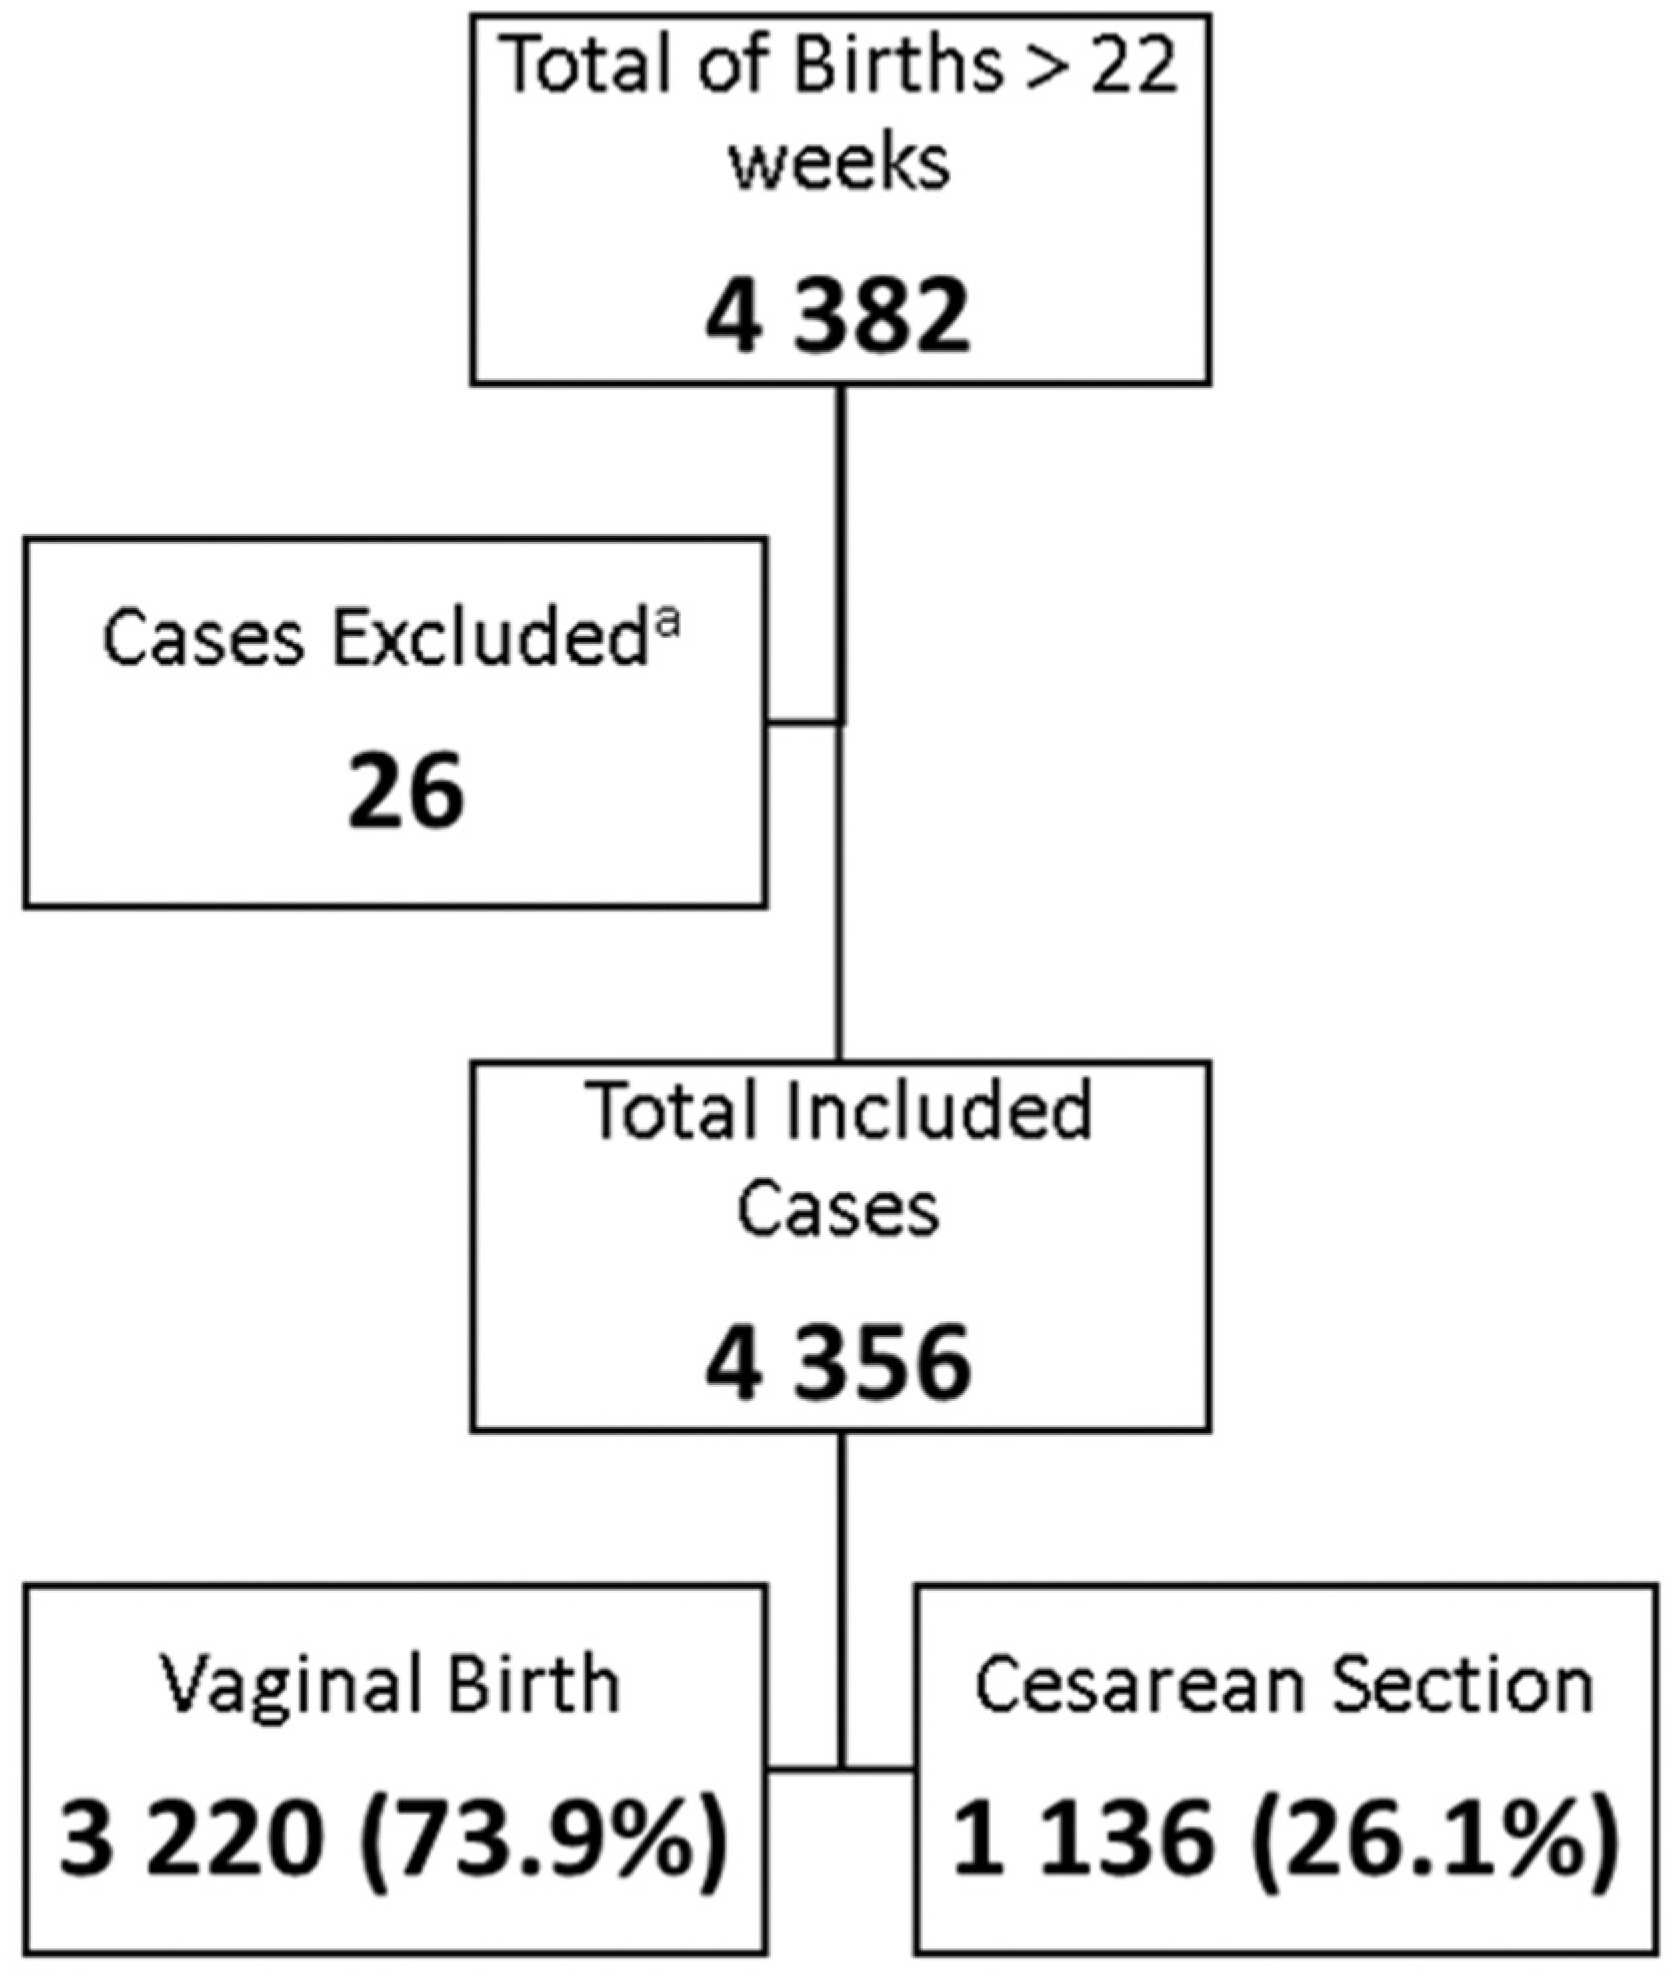 Robson’s Ten Group Classification System to Evaluate Cesarean Section Rates in Honduras: The Relevance of Labor Induction